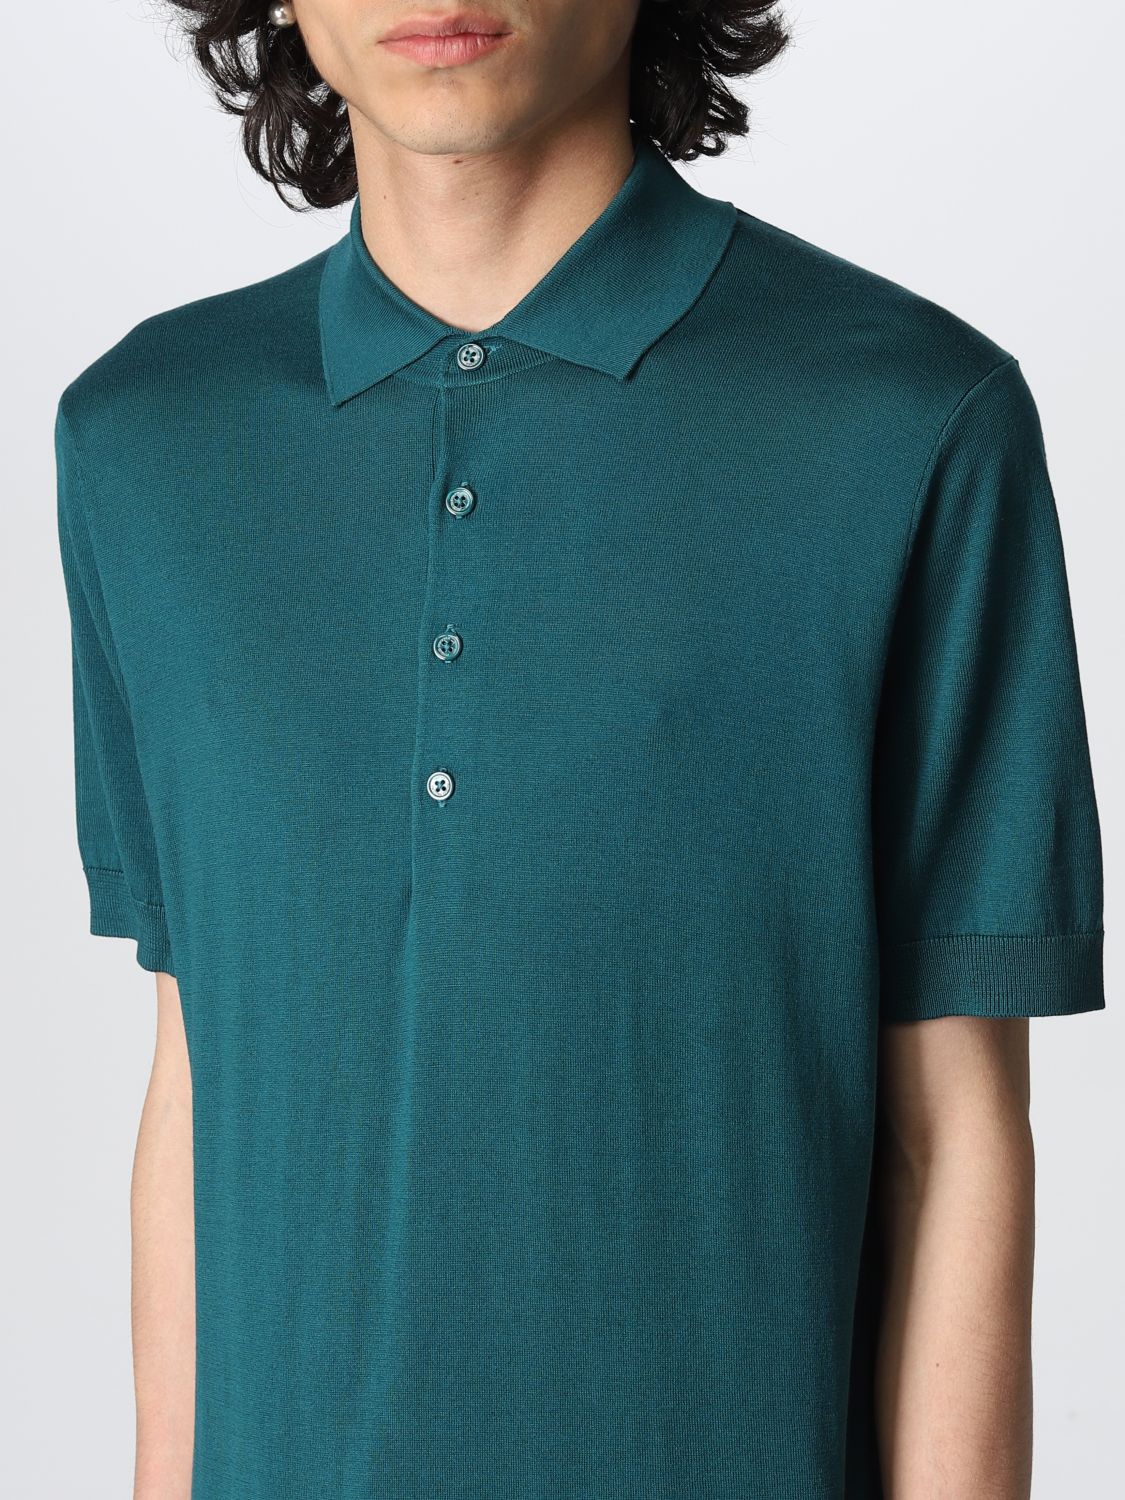 Polo shirt Paolo Pecora: Paolo Pecora polo shirt for man peacock 3